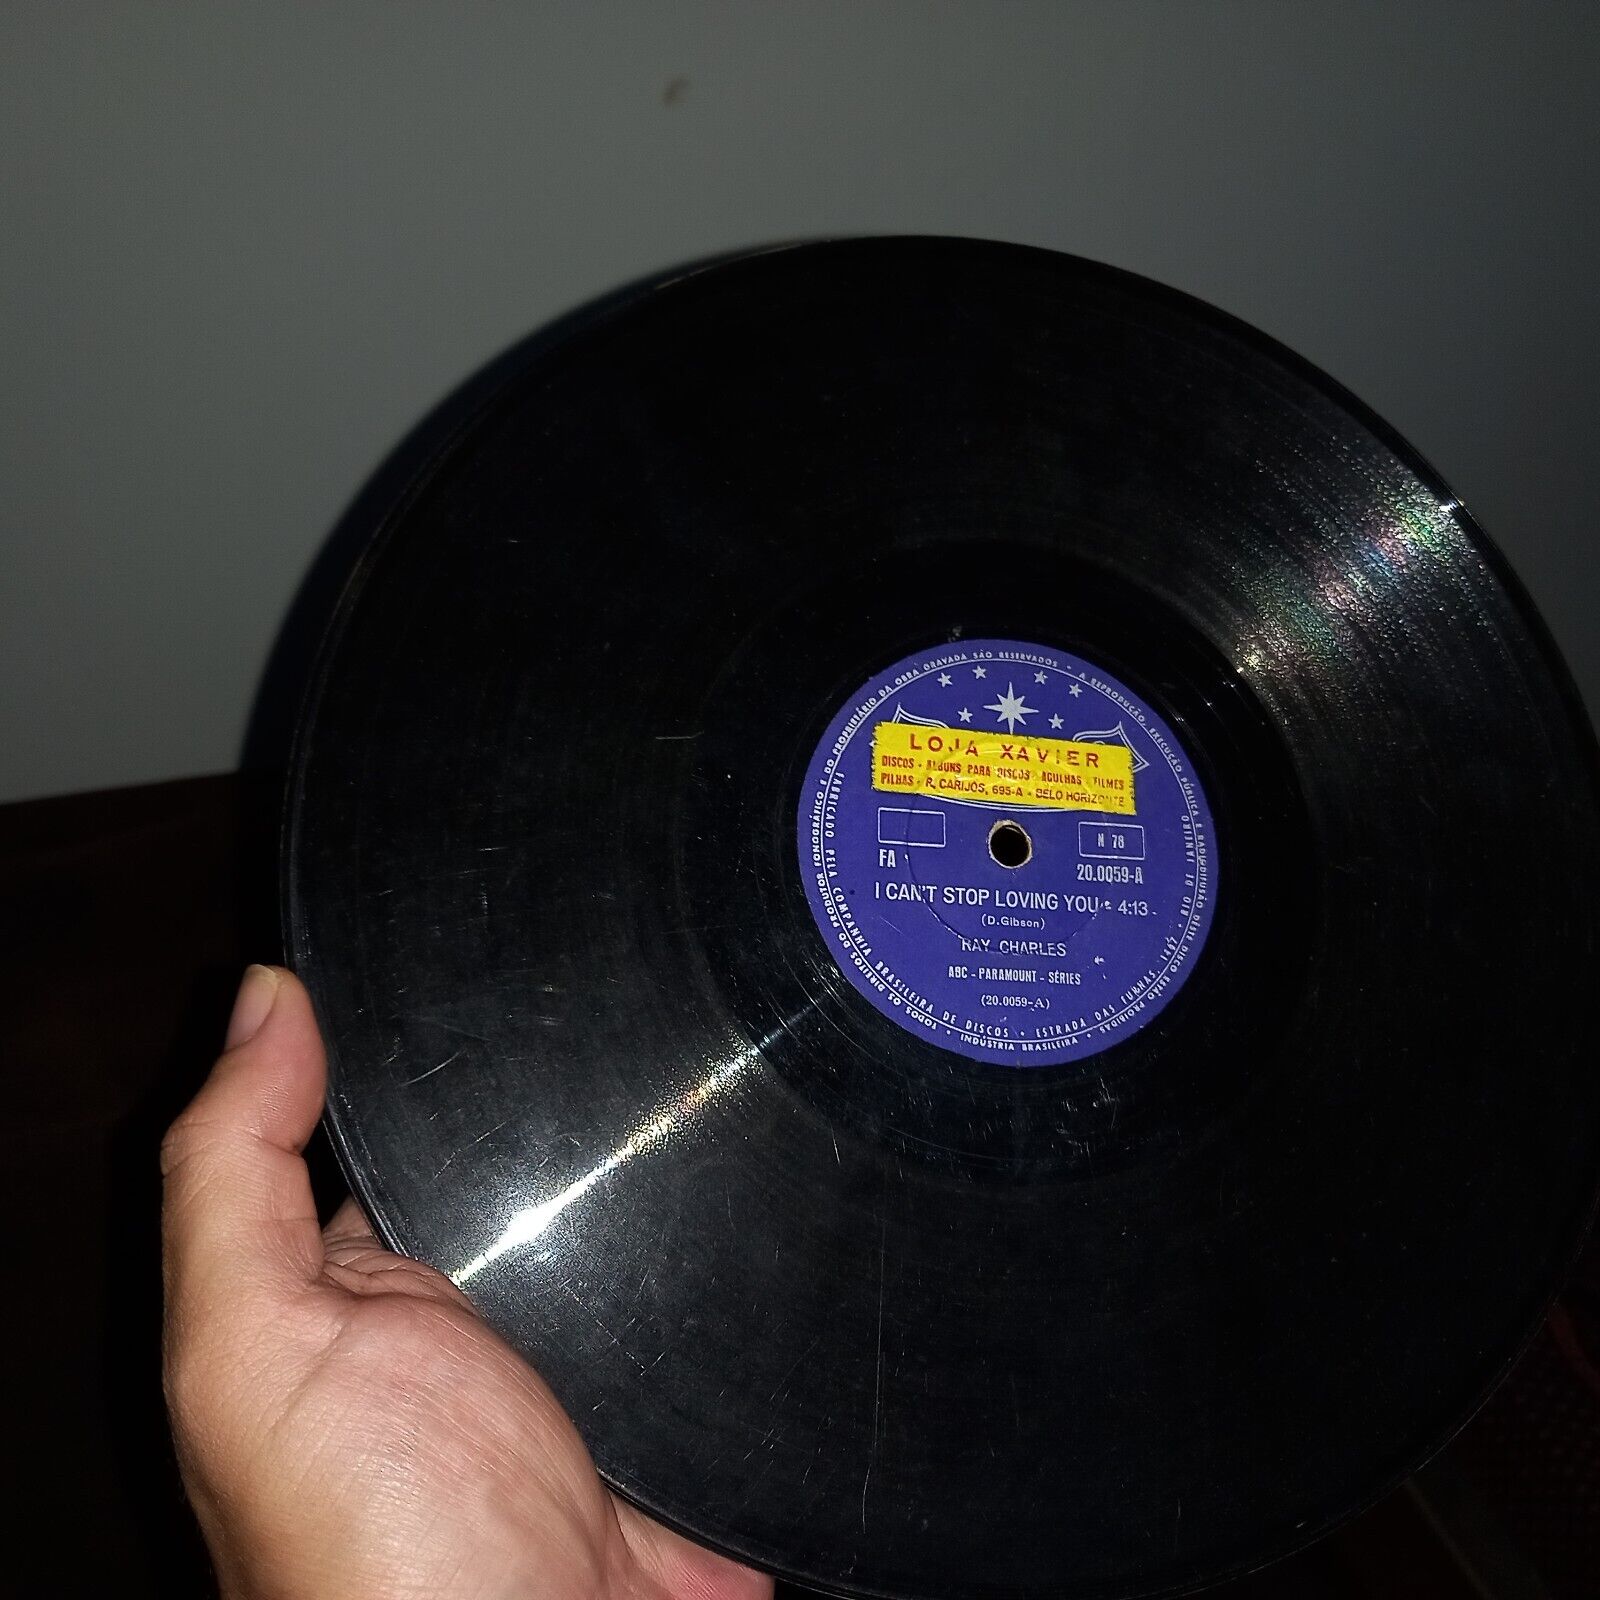 Pic 2 10" RAY CHARLES 78 RPM "I CAN'T STOP LOVING YOU" + "BYE BYE LOVE" BRAZIL 1962 VG